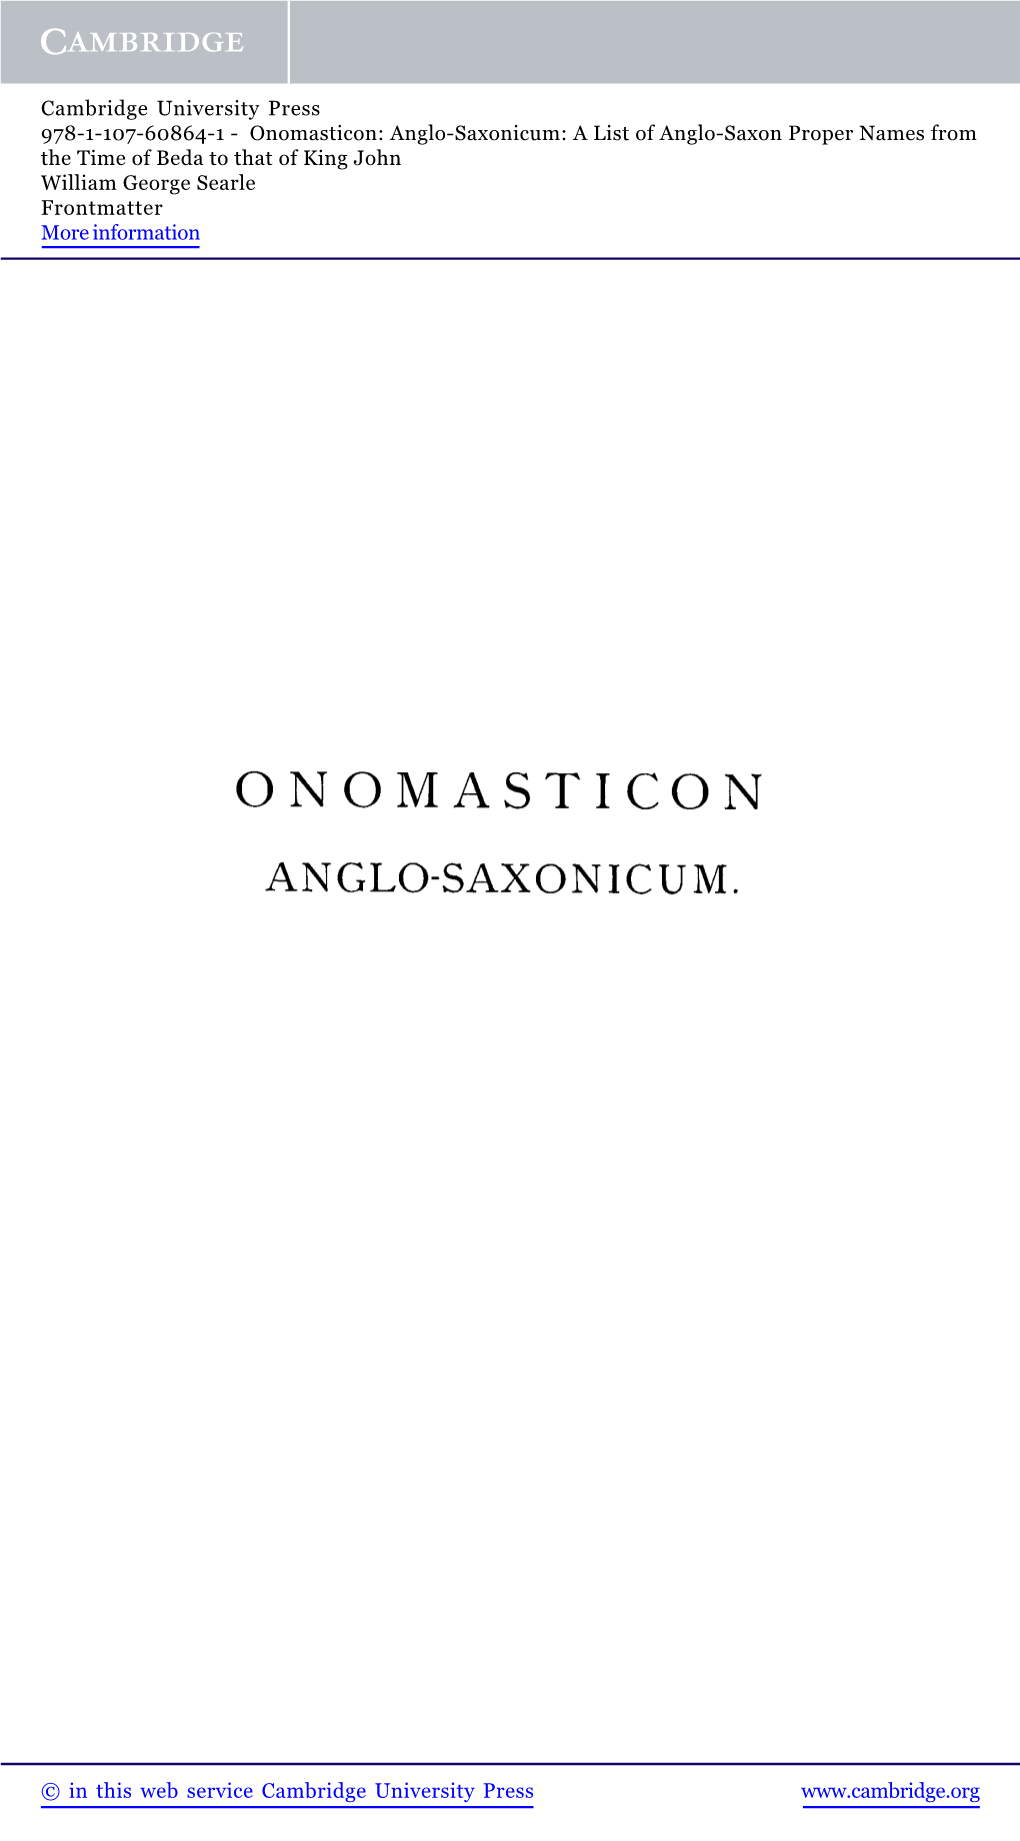 Onomasticon: Anglo-Saxonicum: a List of Anglo-Saxon Proper Names from the Time of Beda to That of King John William George Searle Frontmatter More Information